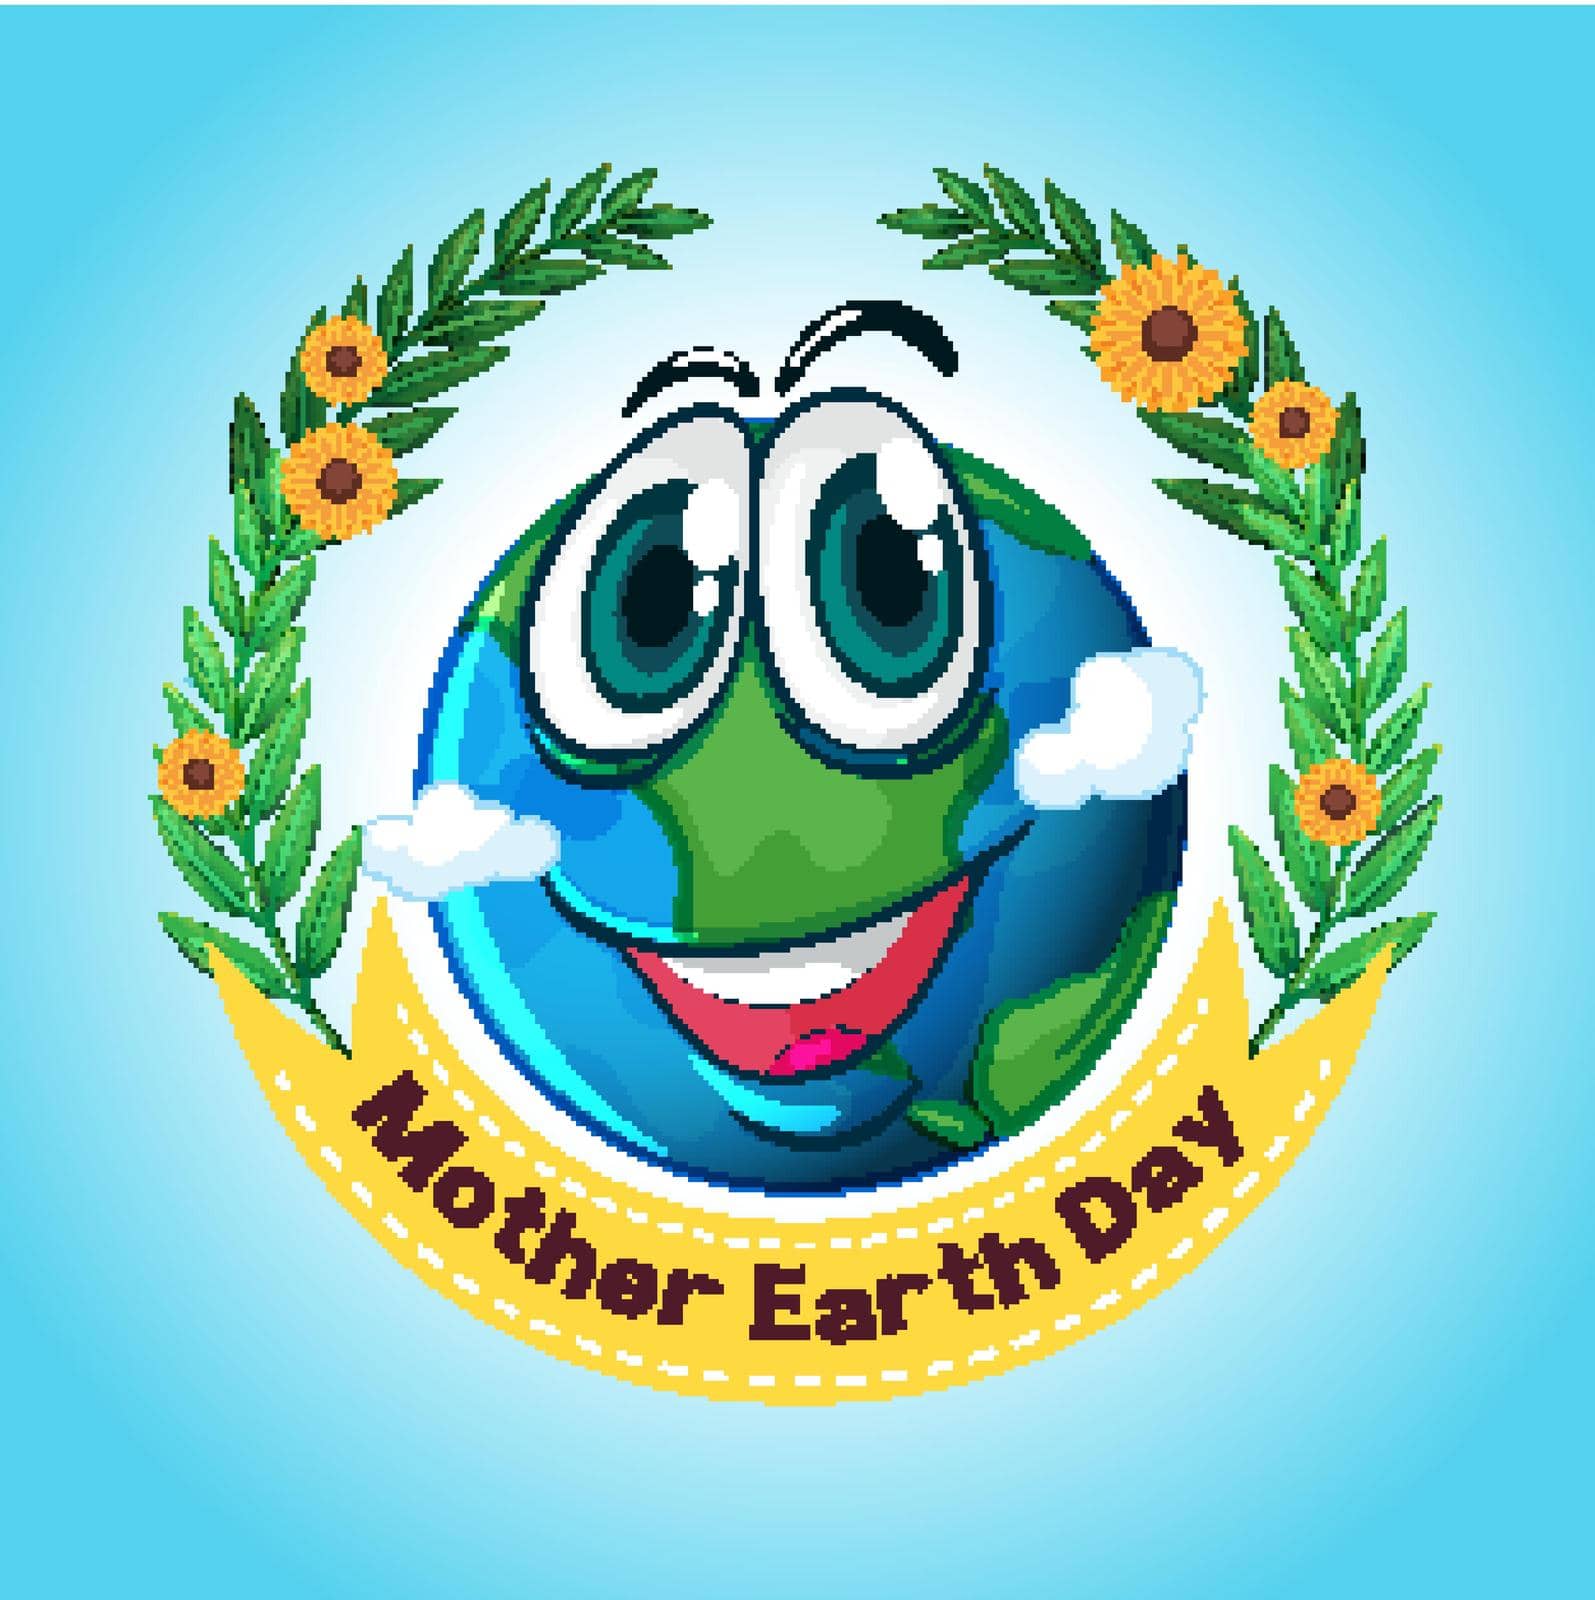 Poster design for mother earth day with big smile on earth illustration